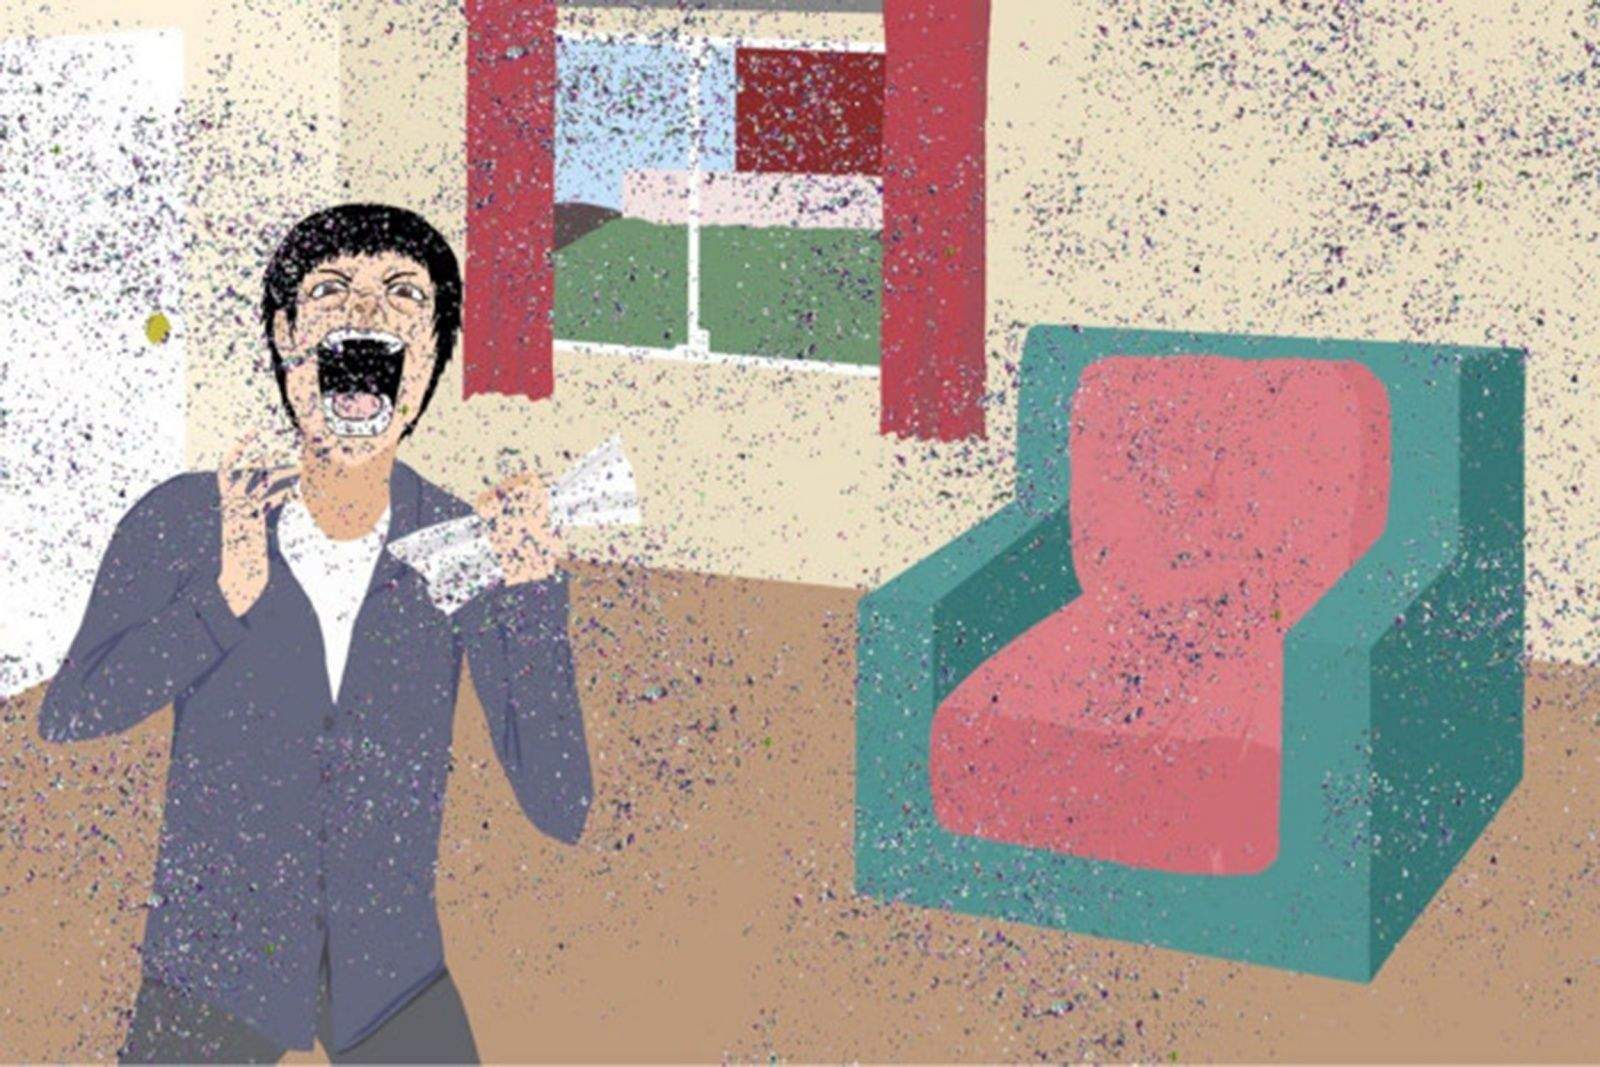 An illustration for the website shipyourenemiesglitter.com depicts the anger that ensues when opening an envelop full of glitter sent by a prankster.